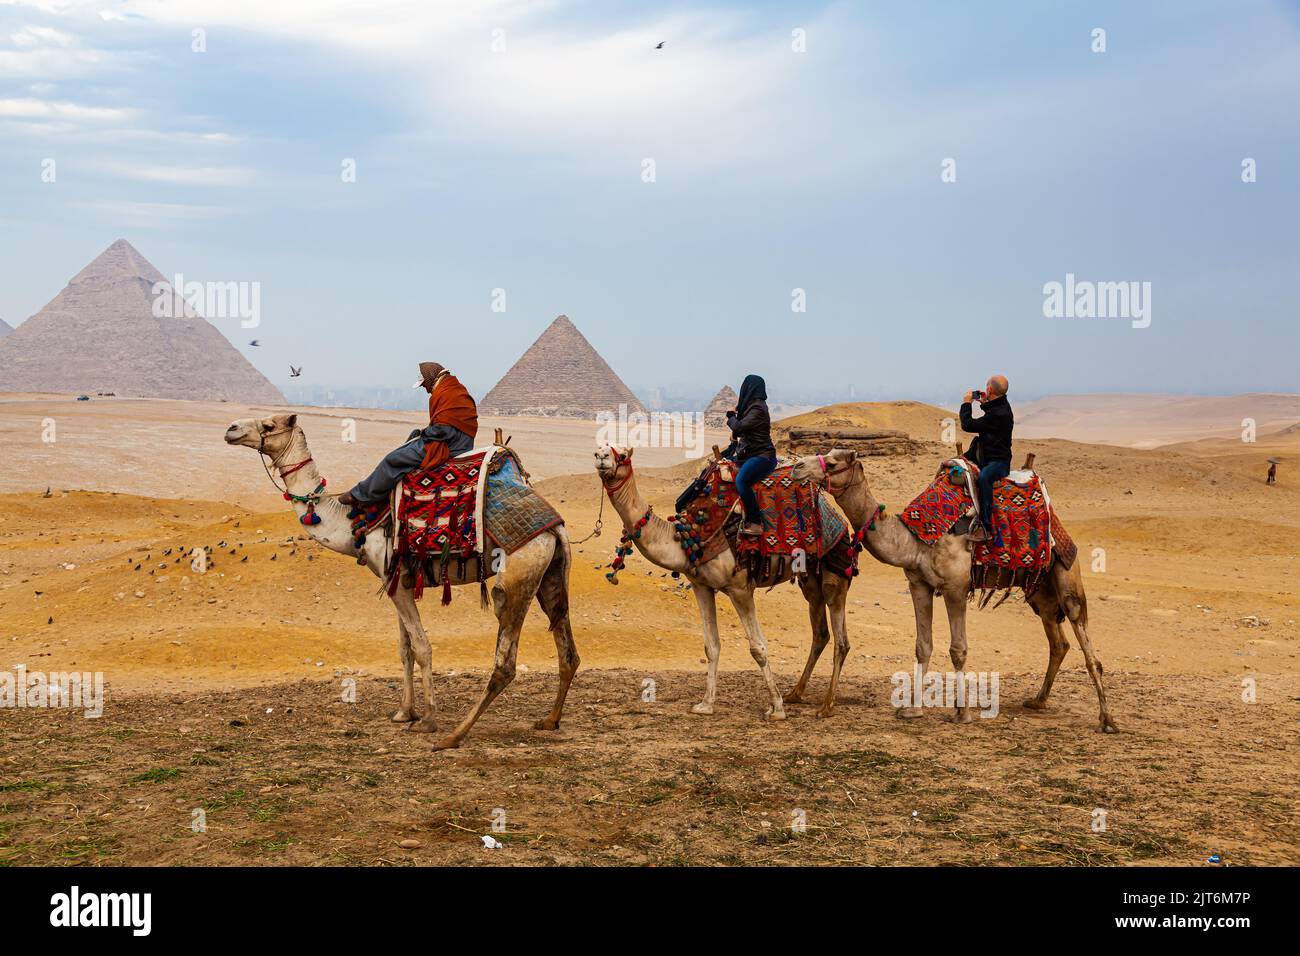 Egyptian and tourists riding camal and taking picture Pyramid of Giza in Sahara Desert at Cairo, Egypt. Stock Photo